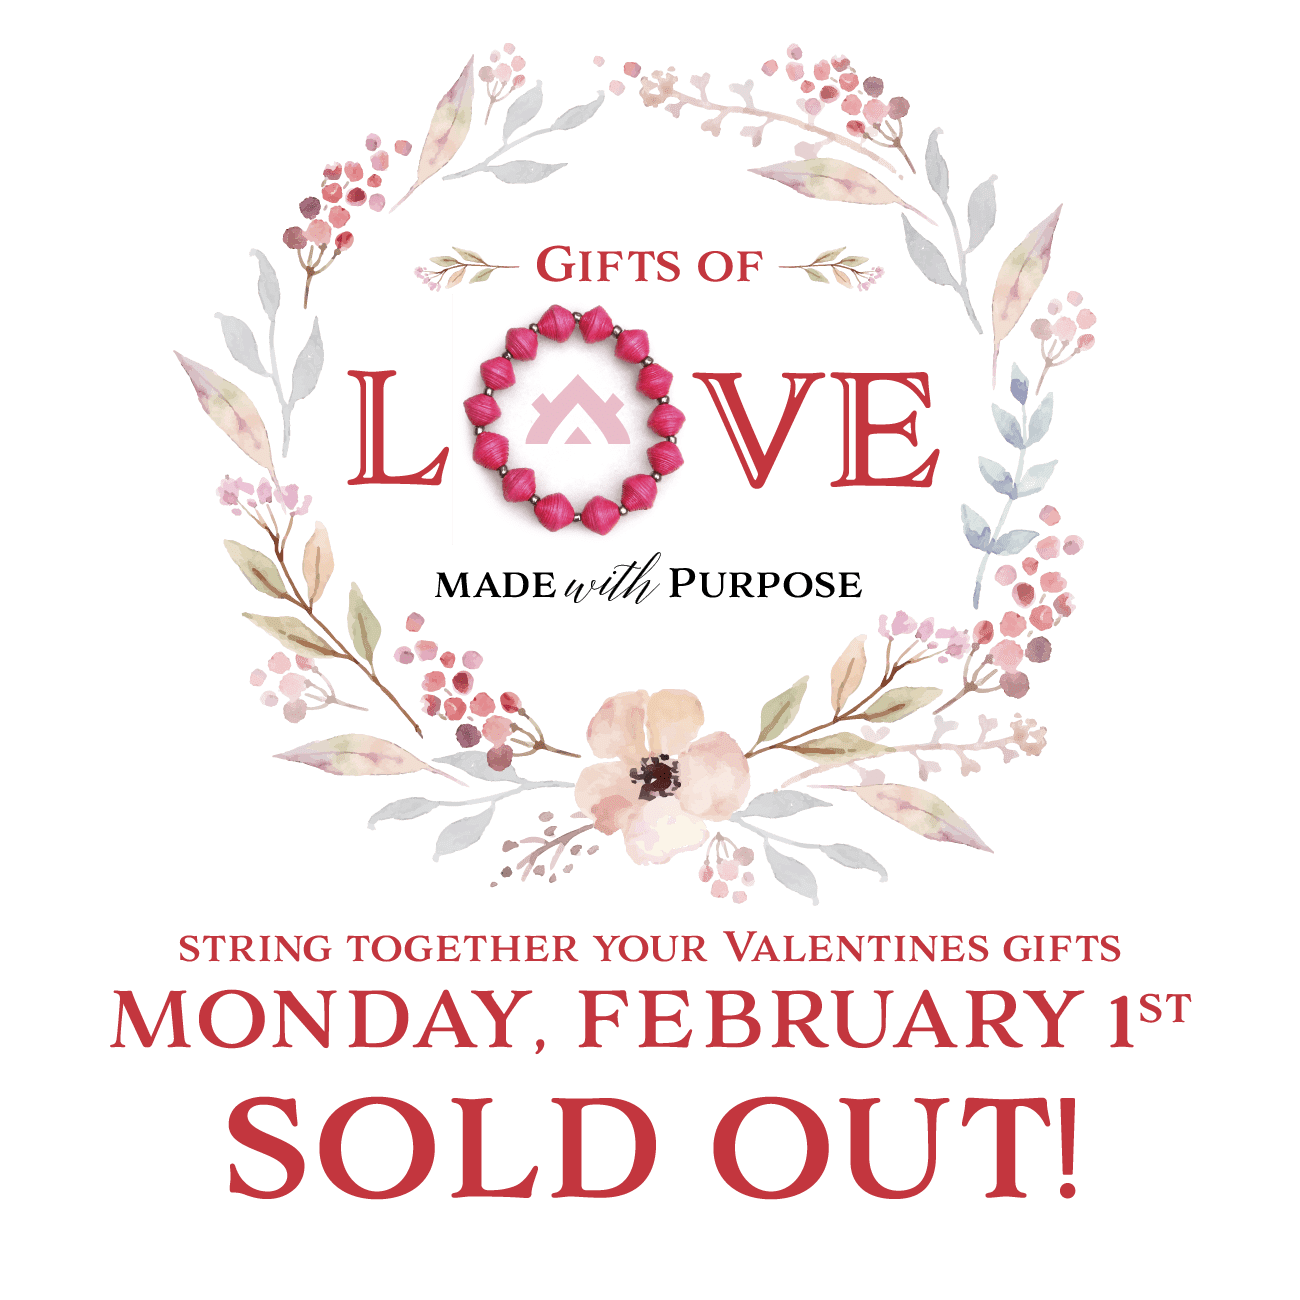 Adera Foundation Gifts Of Love Event February 1st Sold Out